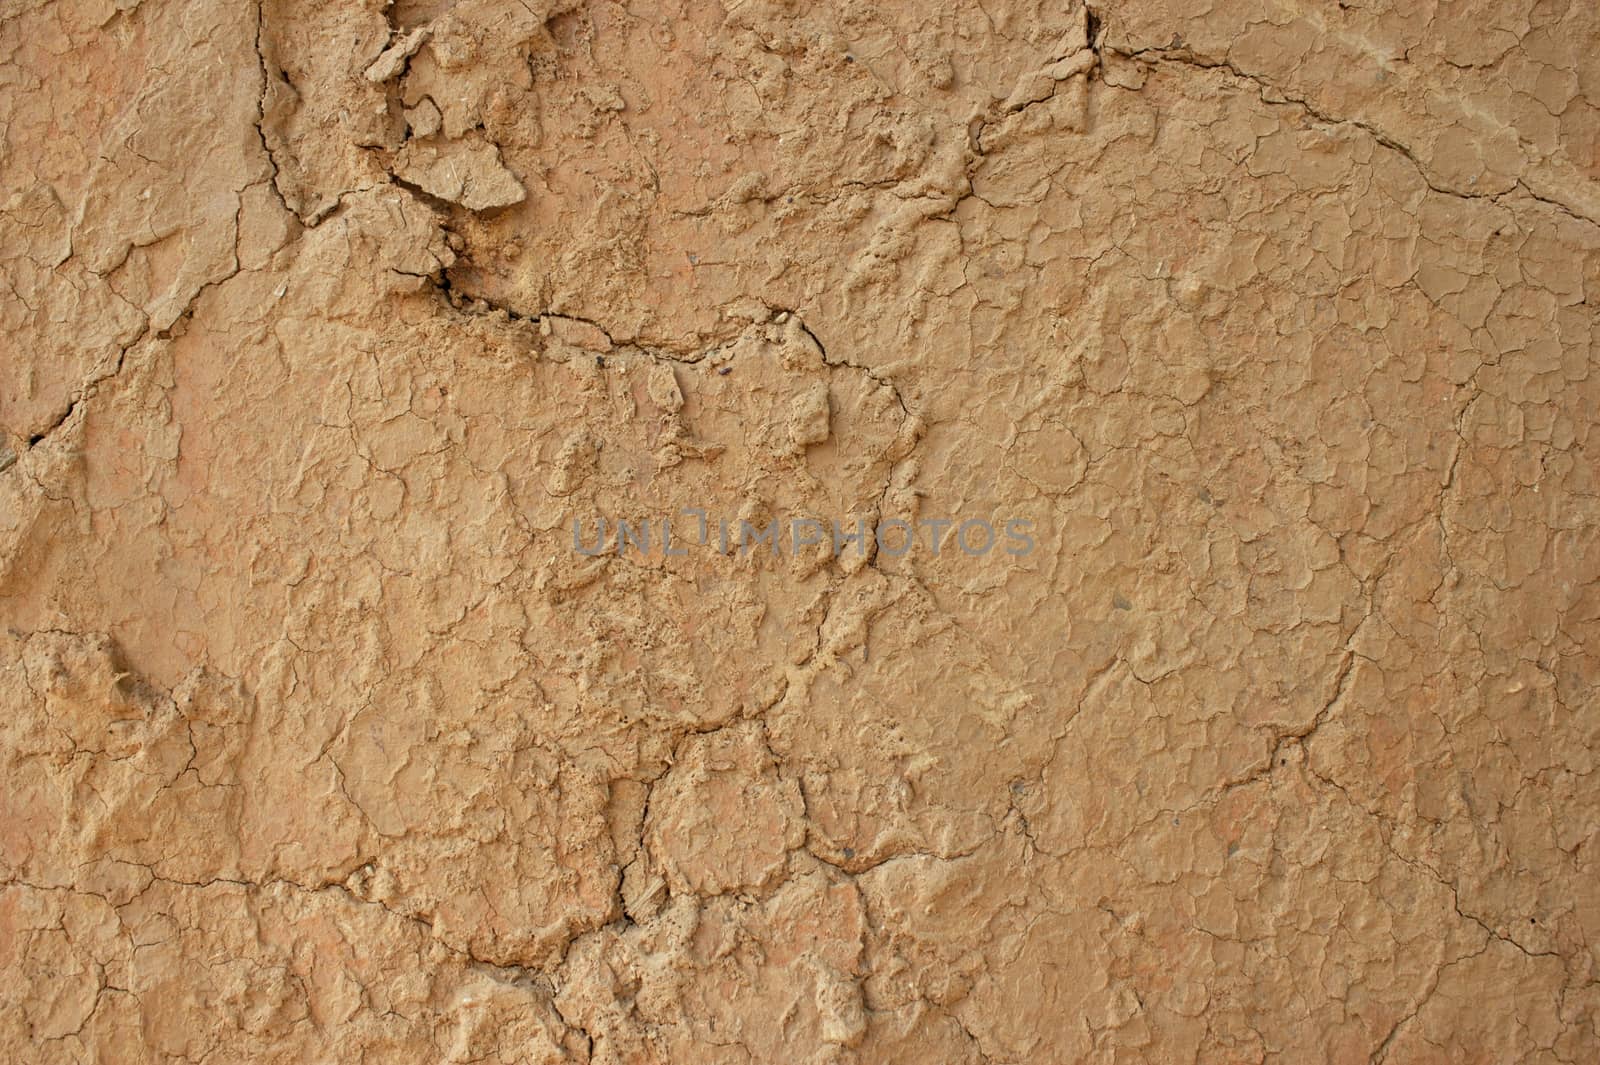 Cracked Mud Wall Texture Background by RichieThakur